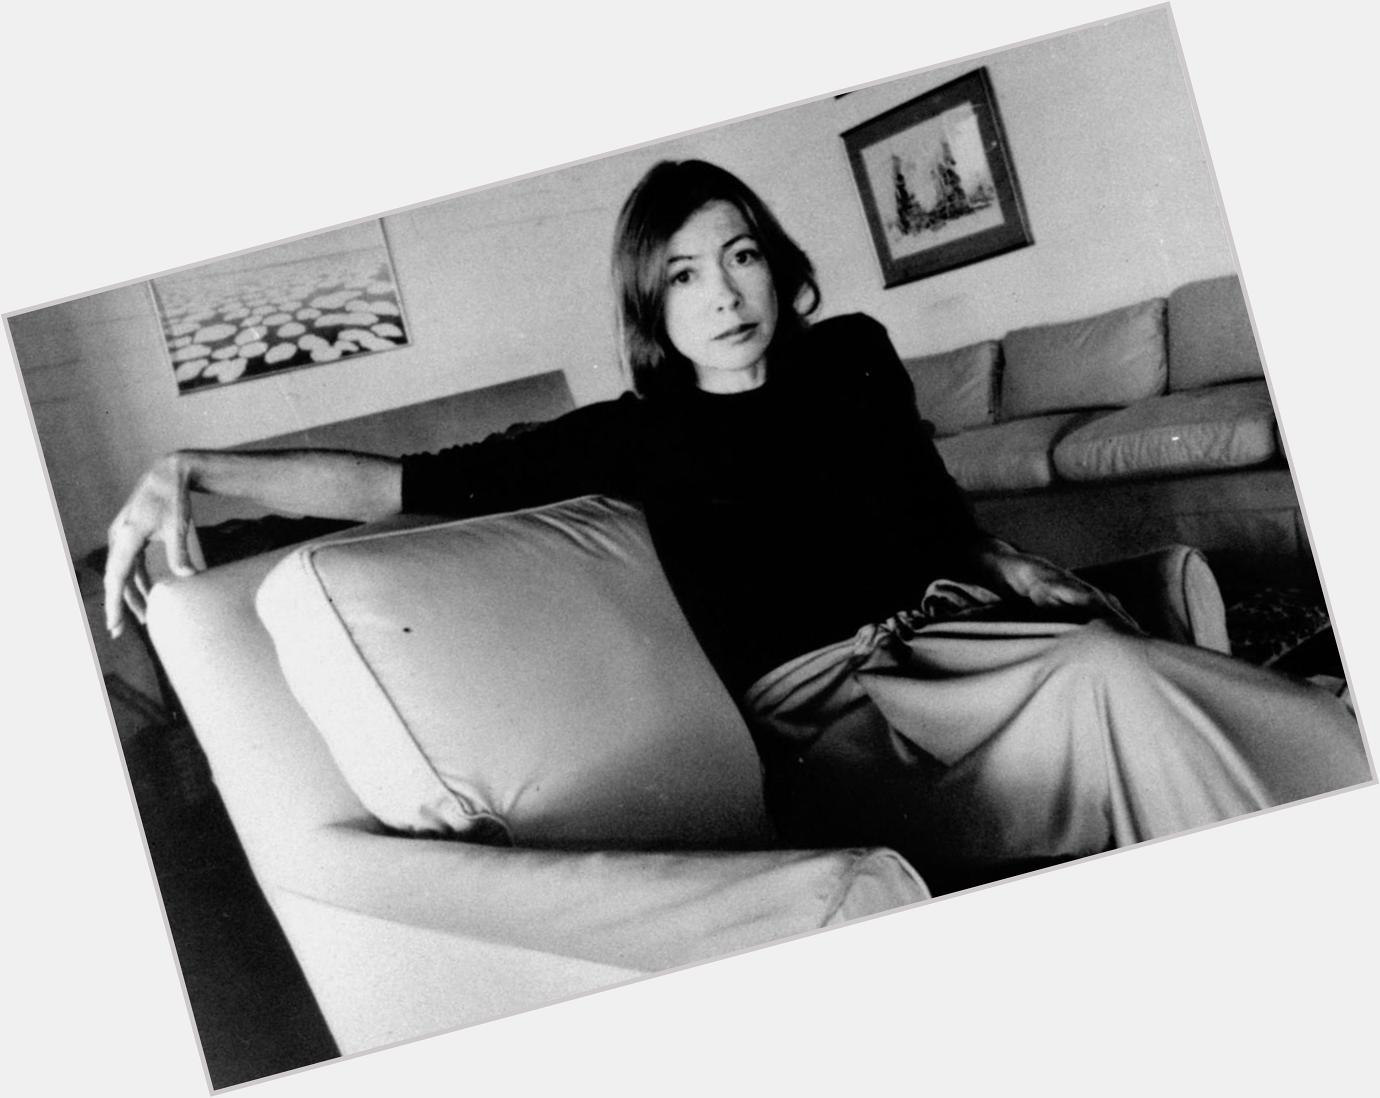 Joan Didion, great novelist and journalist, turns 80 today:  